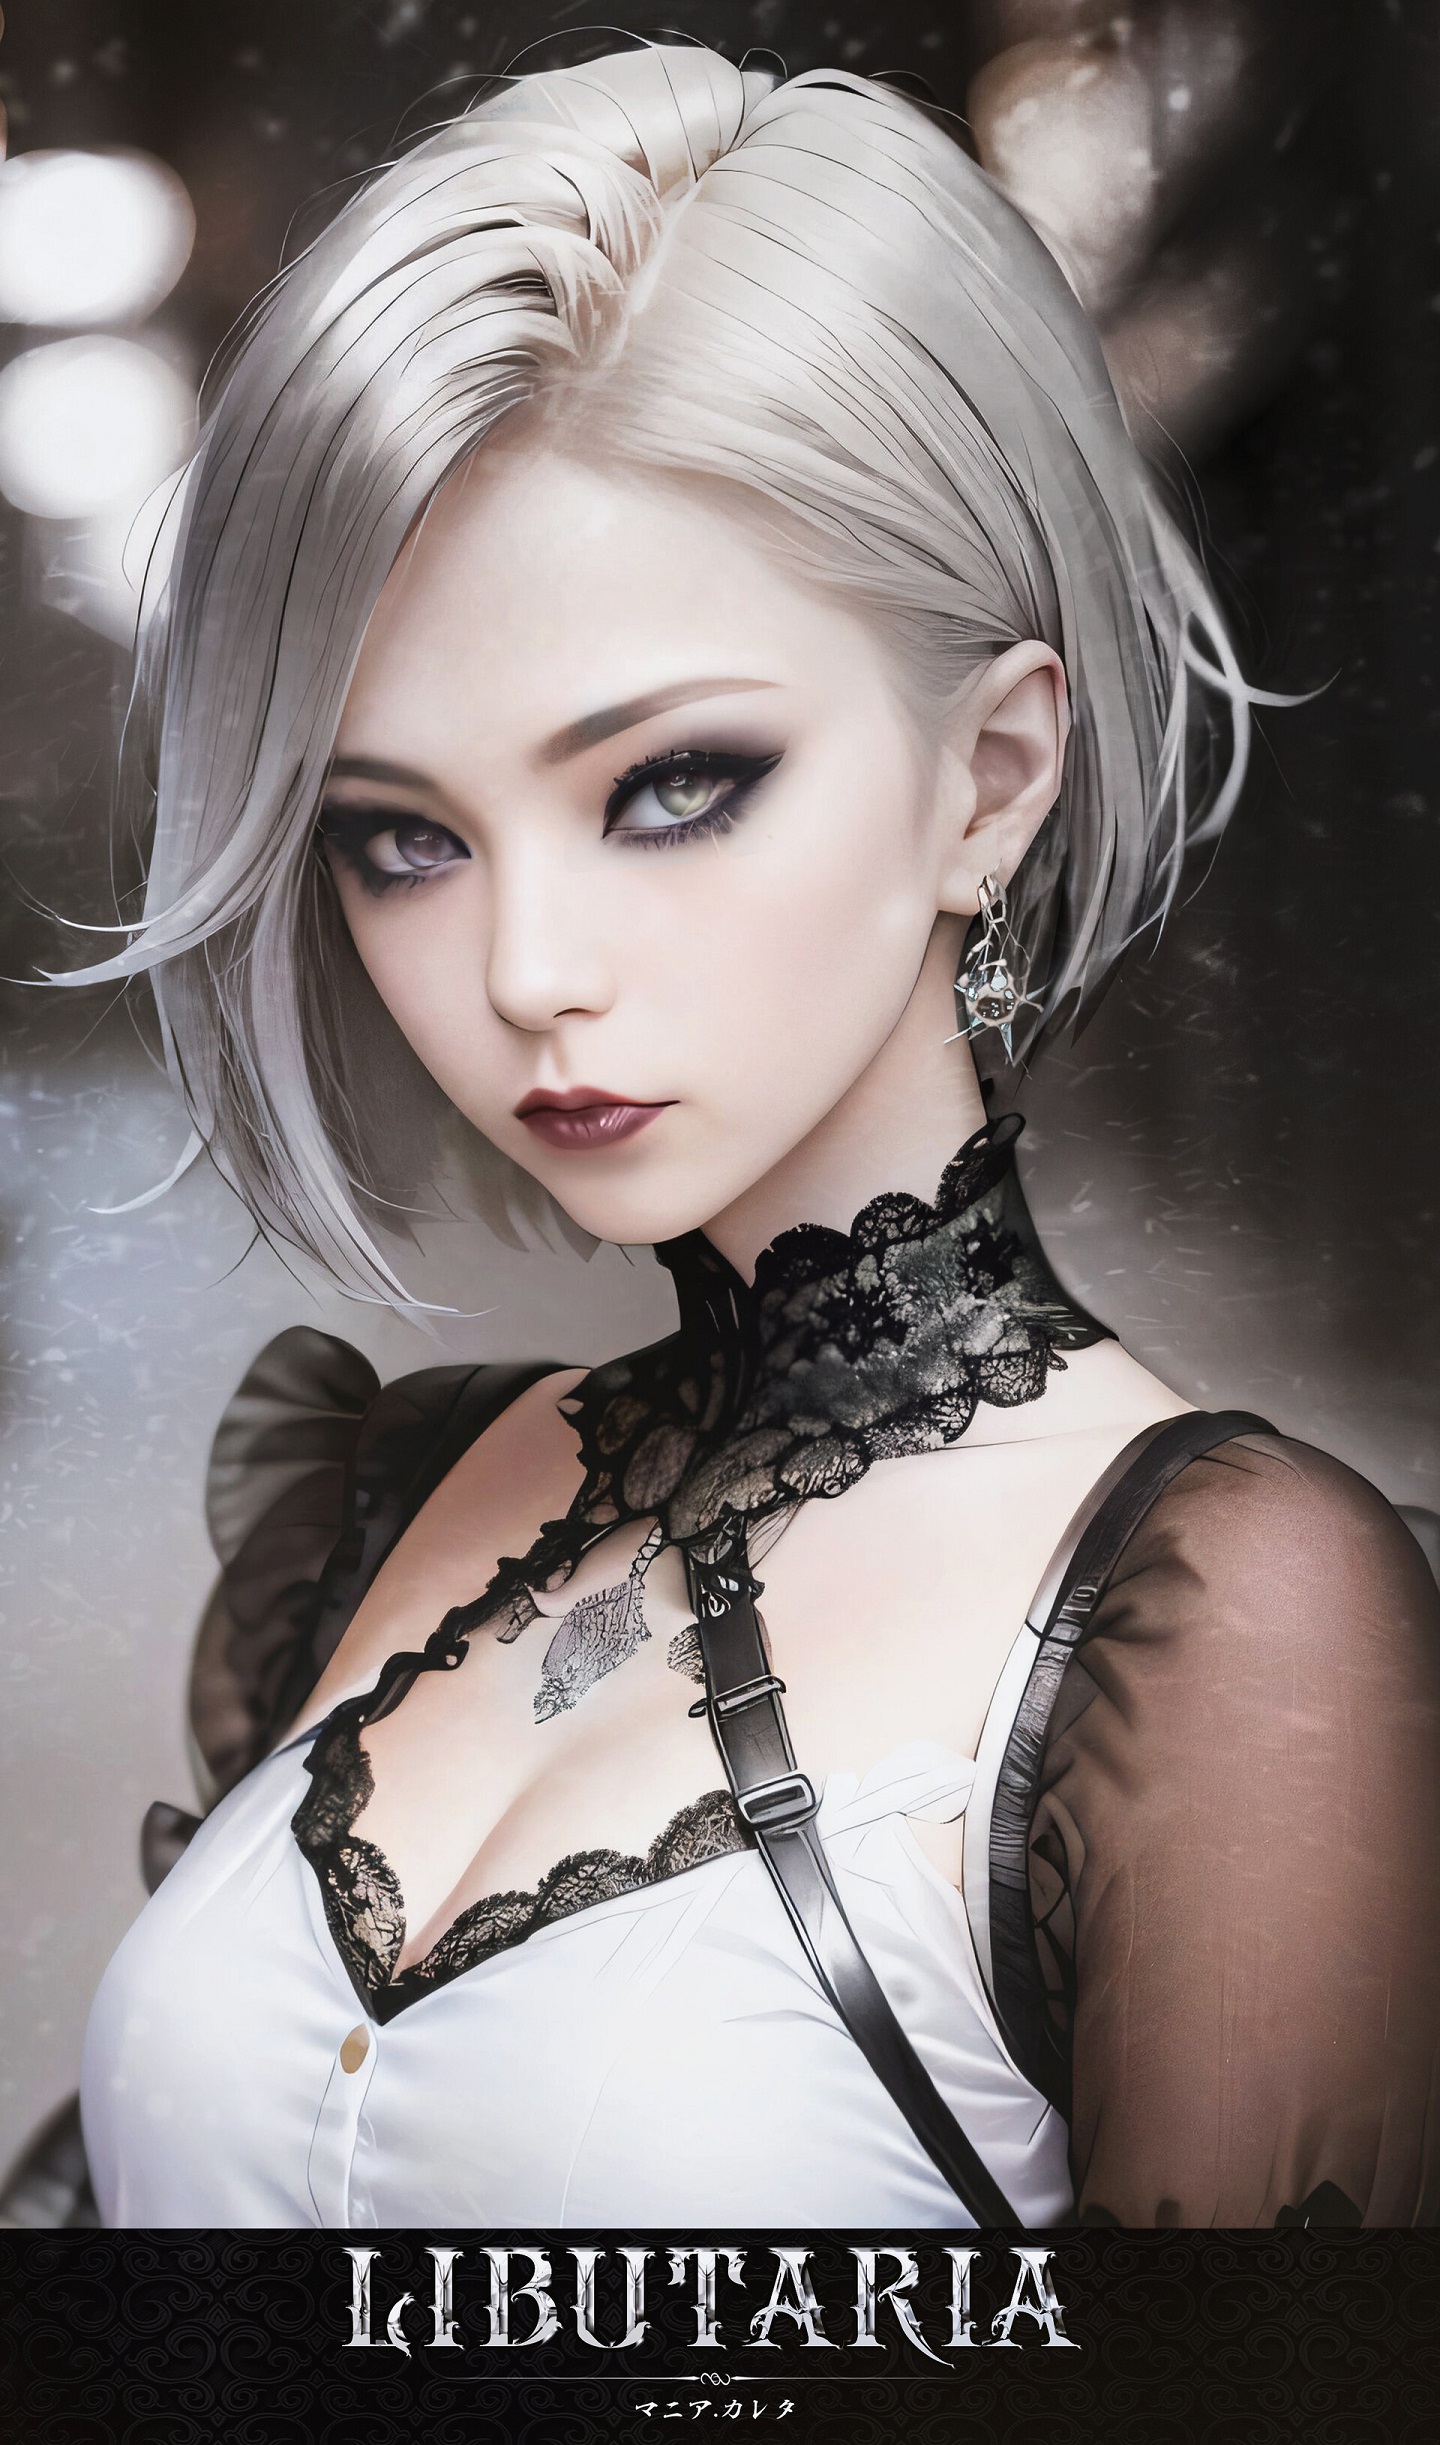 General 1440x2445 Mania Carta drawing women silver hair makeup portrait portrait display earring short hair cleavage looking at viewer Japanese blurred blurry background